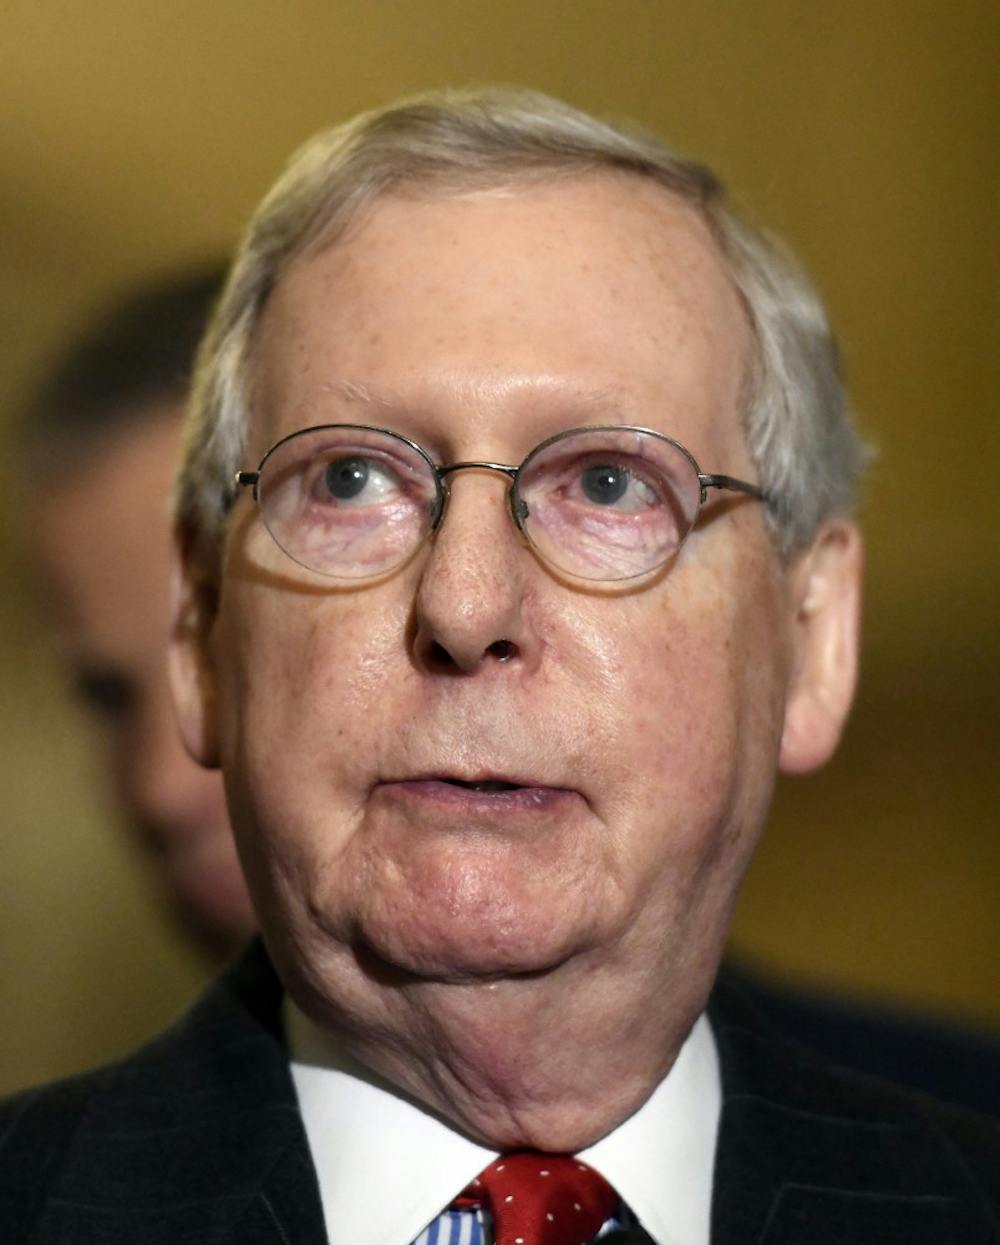 <p>United States Senate Majority Leader Mitch McConnell (R-Ky.) makes remarks to the media following the weekly U.S. Senate Republican Party luncheon on November 28, 2017, in the U.S. Capitol in Washington, D.C.&nbsp;</p>